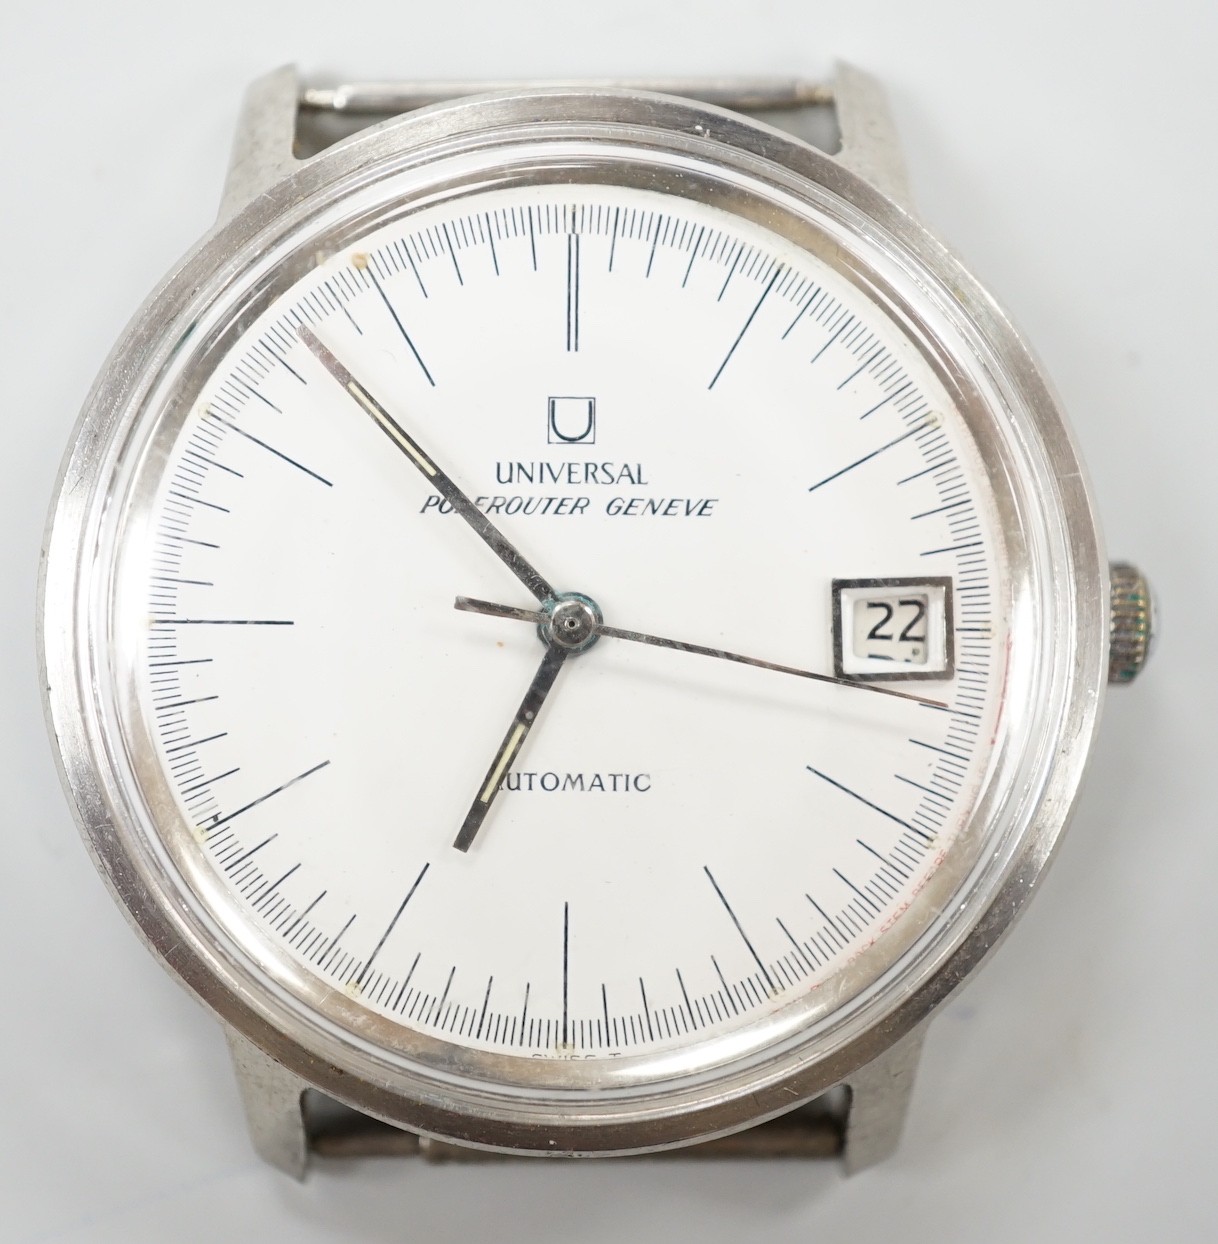 A gentleman's steel Universal automatic wrist watch, with baton numerals and date aperture, case diameter 36mm, no strap.